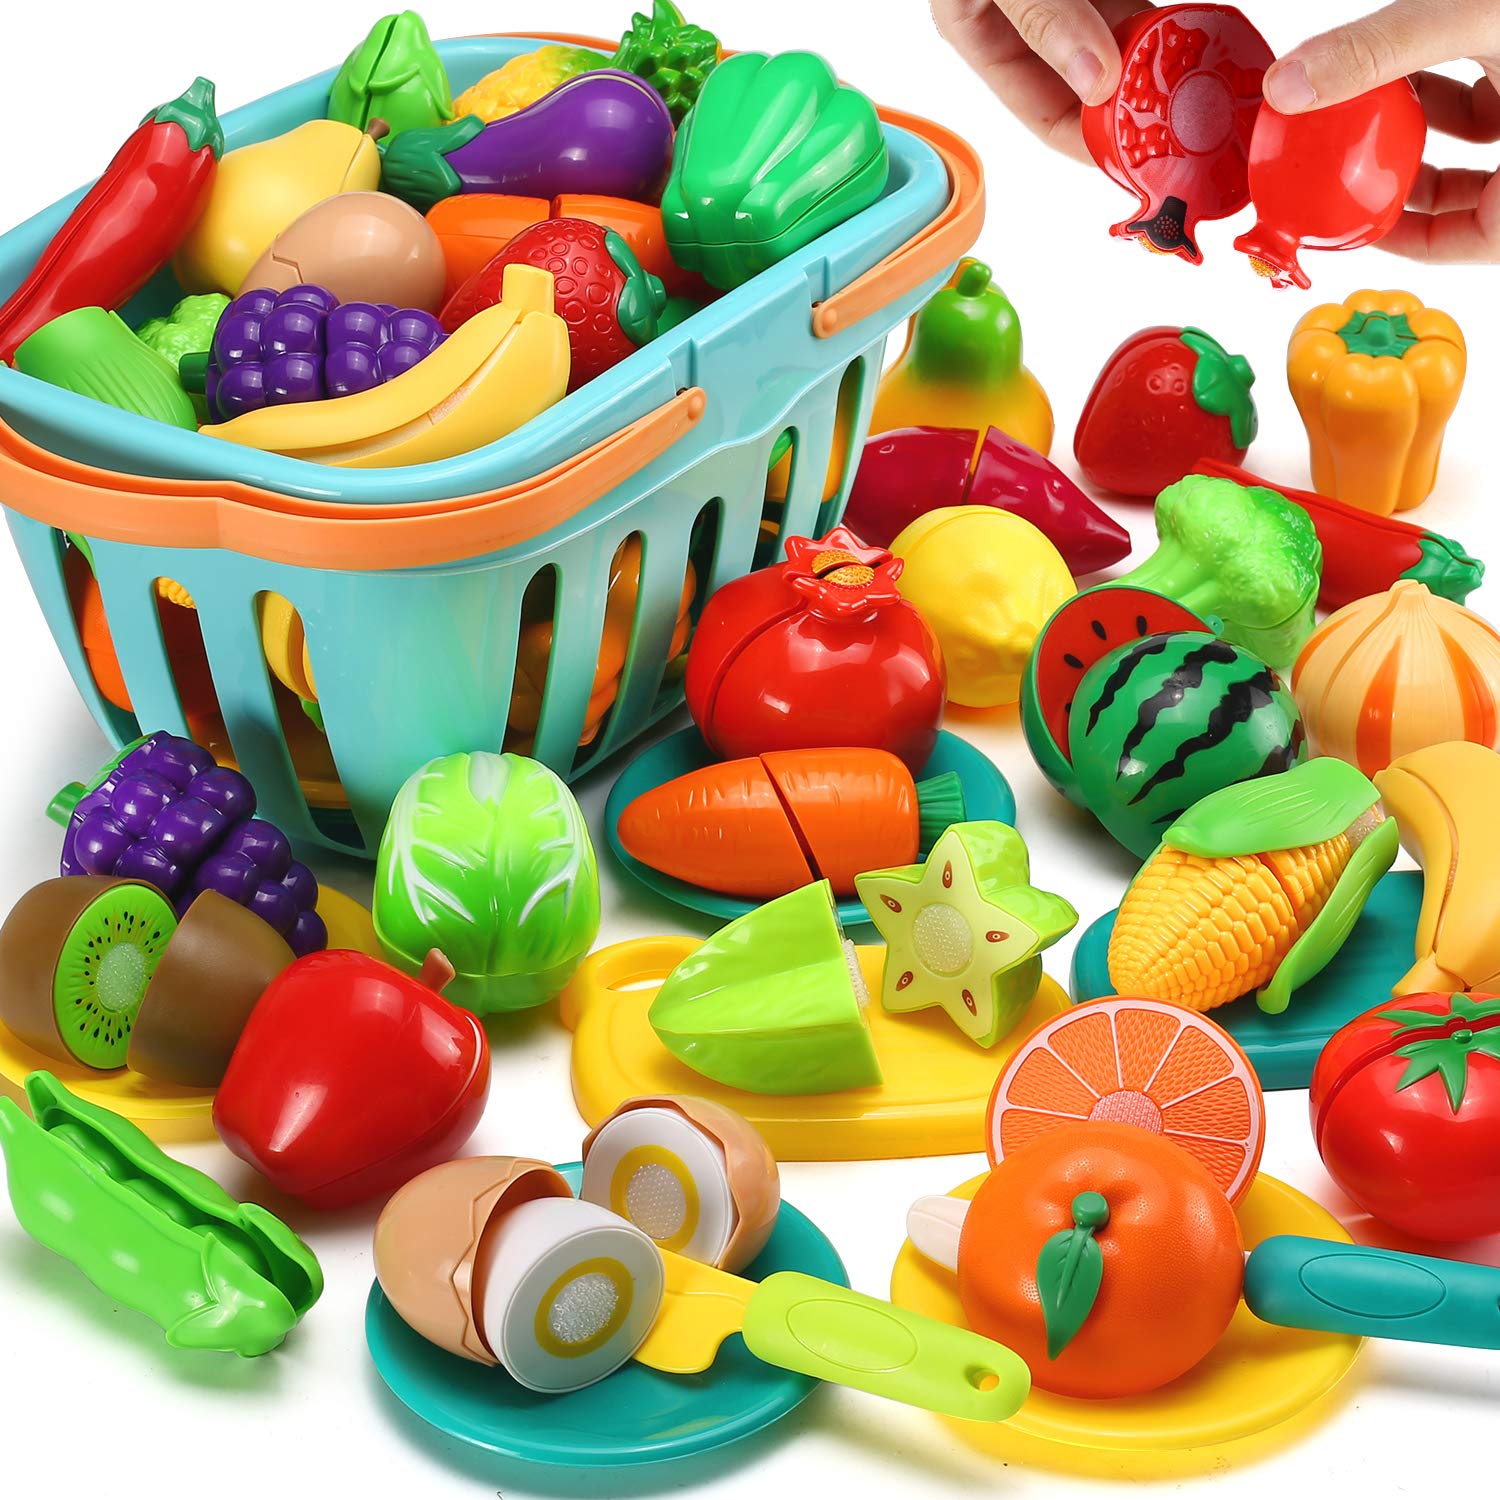 70 PCS Cutting Play Food Toy for Kids Kitchen, Pretend Fruit &Vegetables Accessories with Shopping Storage Basket, Plastic Mini Dishes and Knife, Educational Toy for Toddler Children Birthday Gift